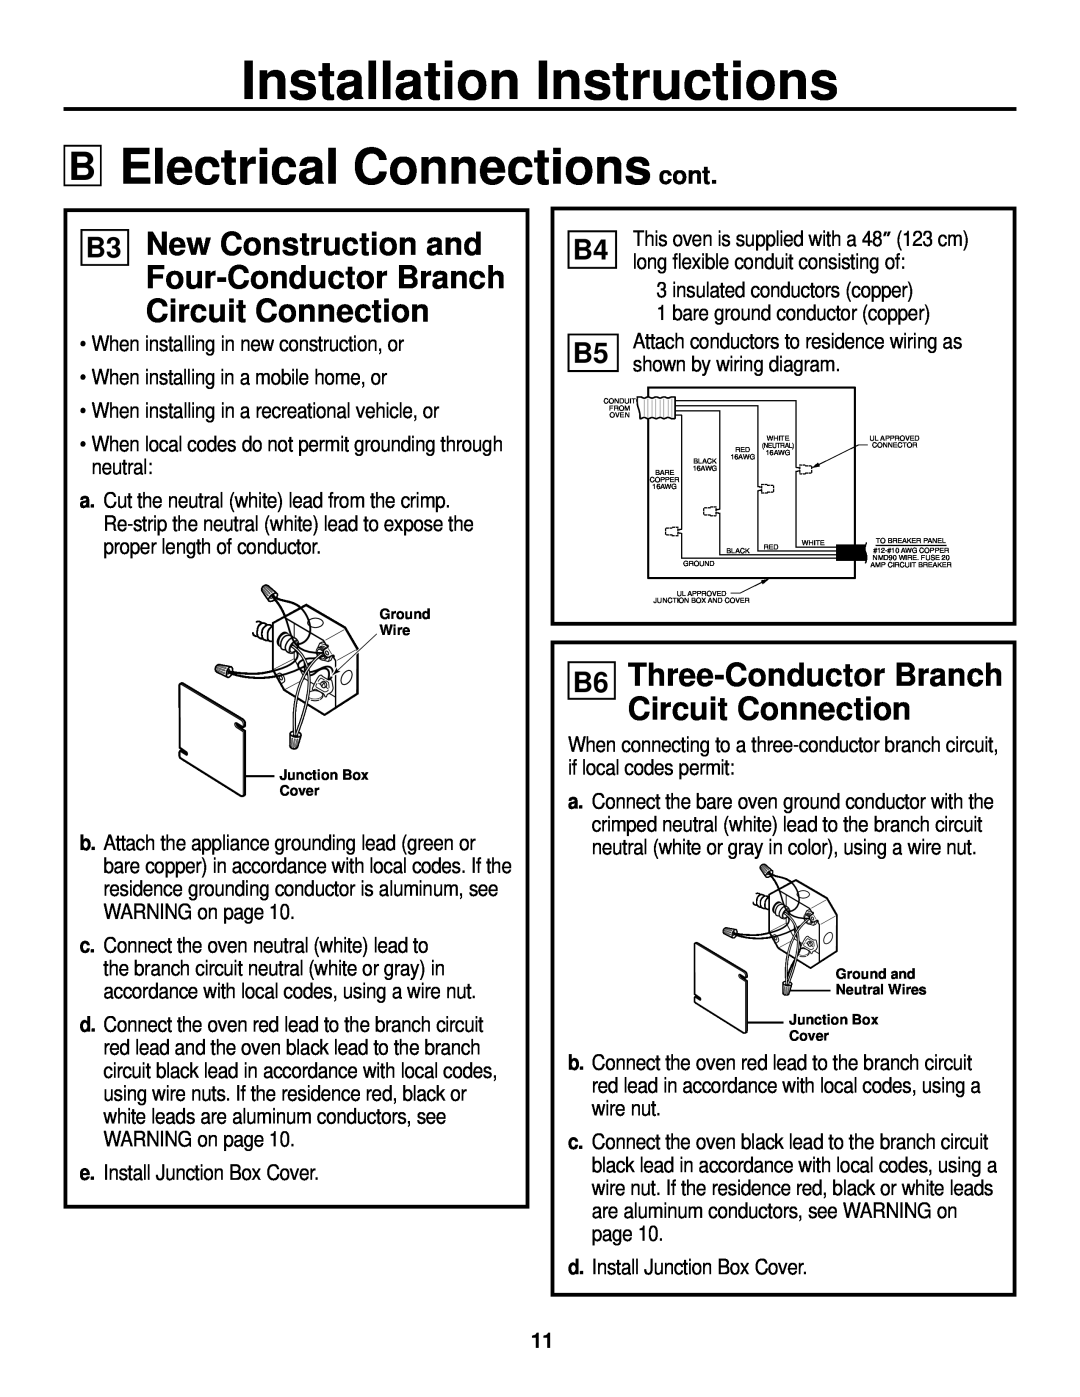 GE ZET1, ZET2 Electrical Connections cont, B3 New Construction and Four-Conductor Branch Circuit Connection 